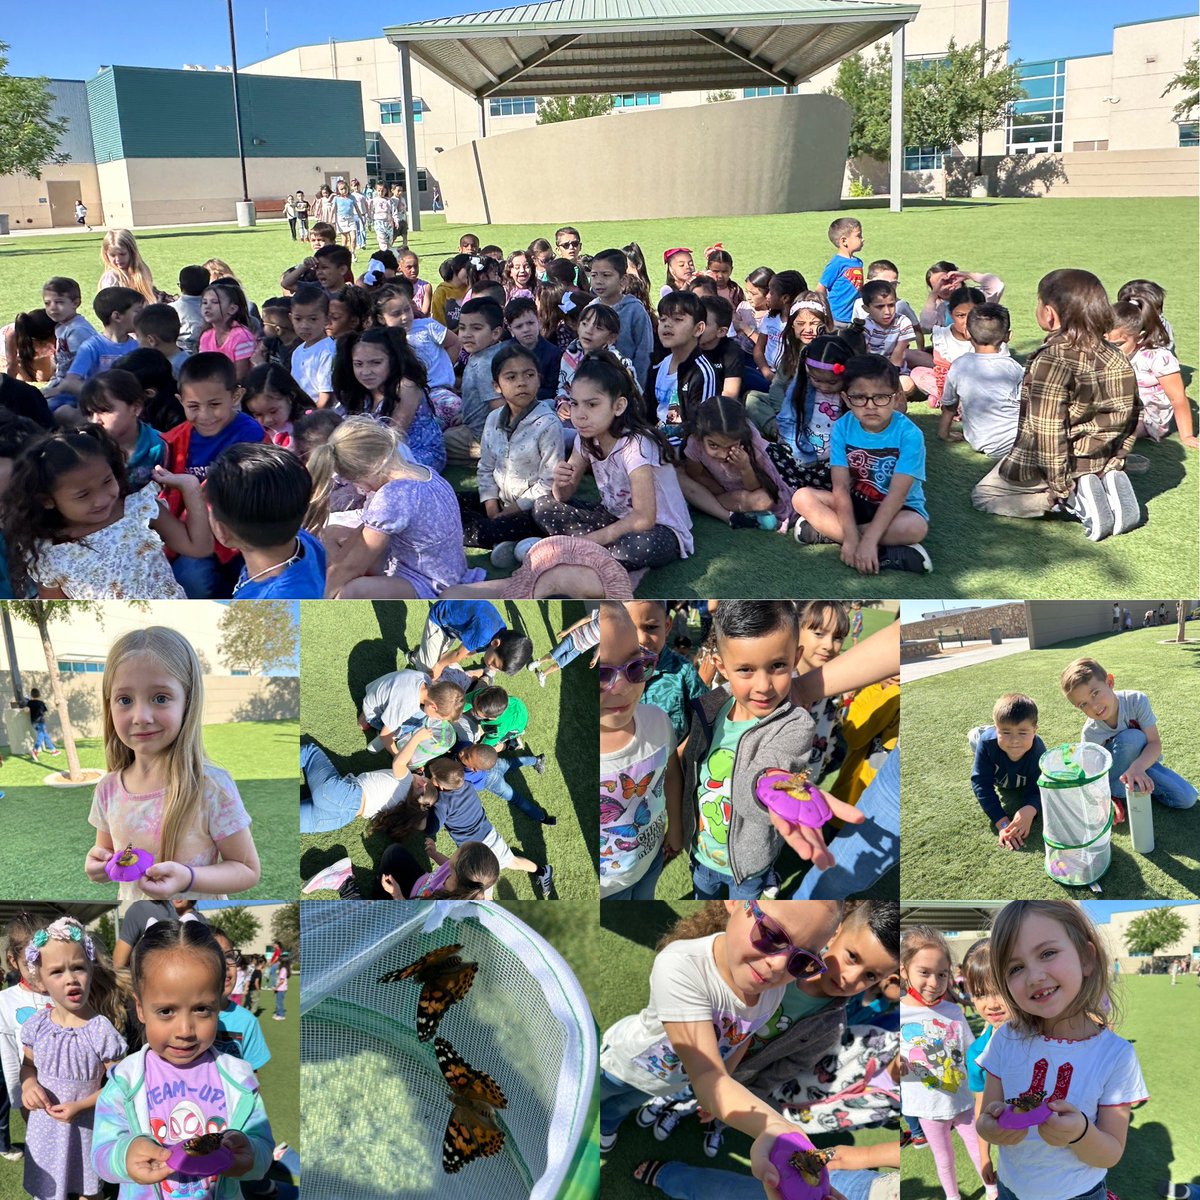 Released our butterflies today after experiencing their FULL life cycle! Might be one of my favorite moments as an educator so far 🦋 🌵#CactusMakesPerfect #TeamSISD